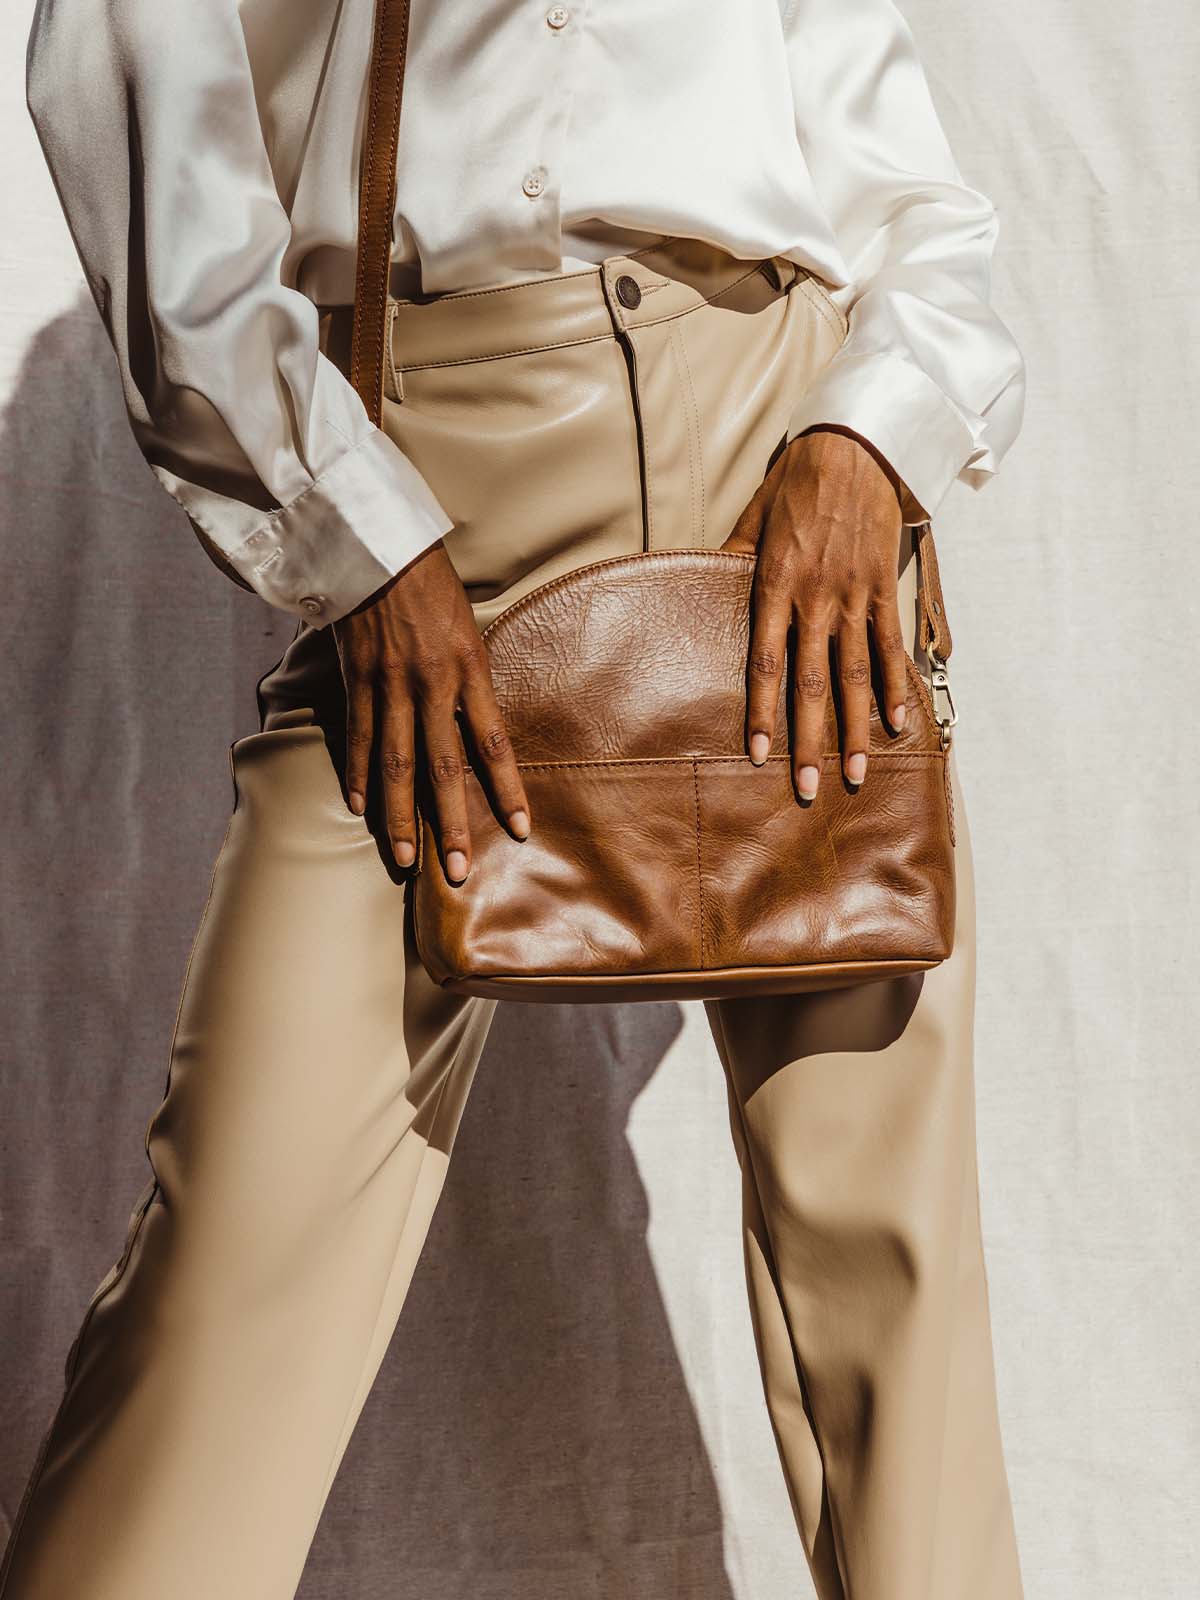 Female model holding half moon leather hand bag across the body. Leather bag has two front pockets.